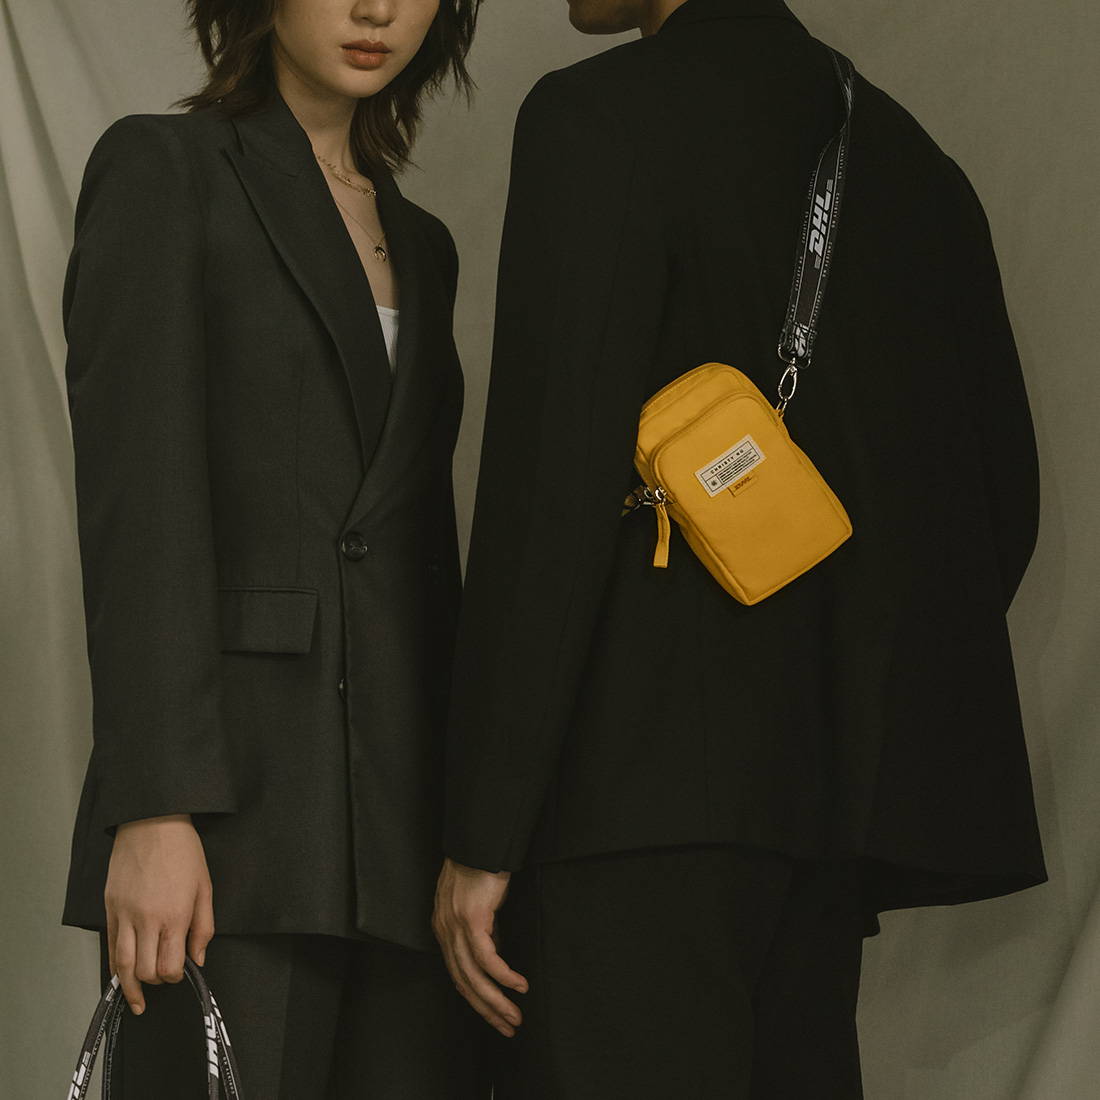 DHL and Christy Ng Unveil Eye-Catching Collection Inspired By Couriers